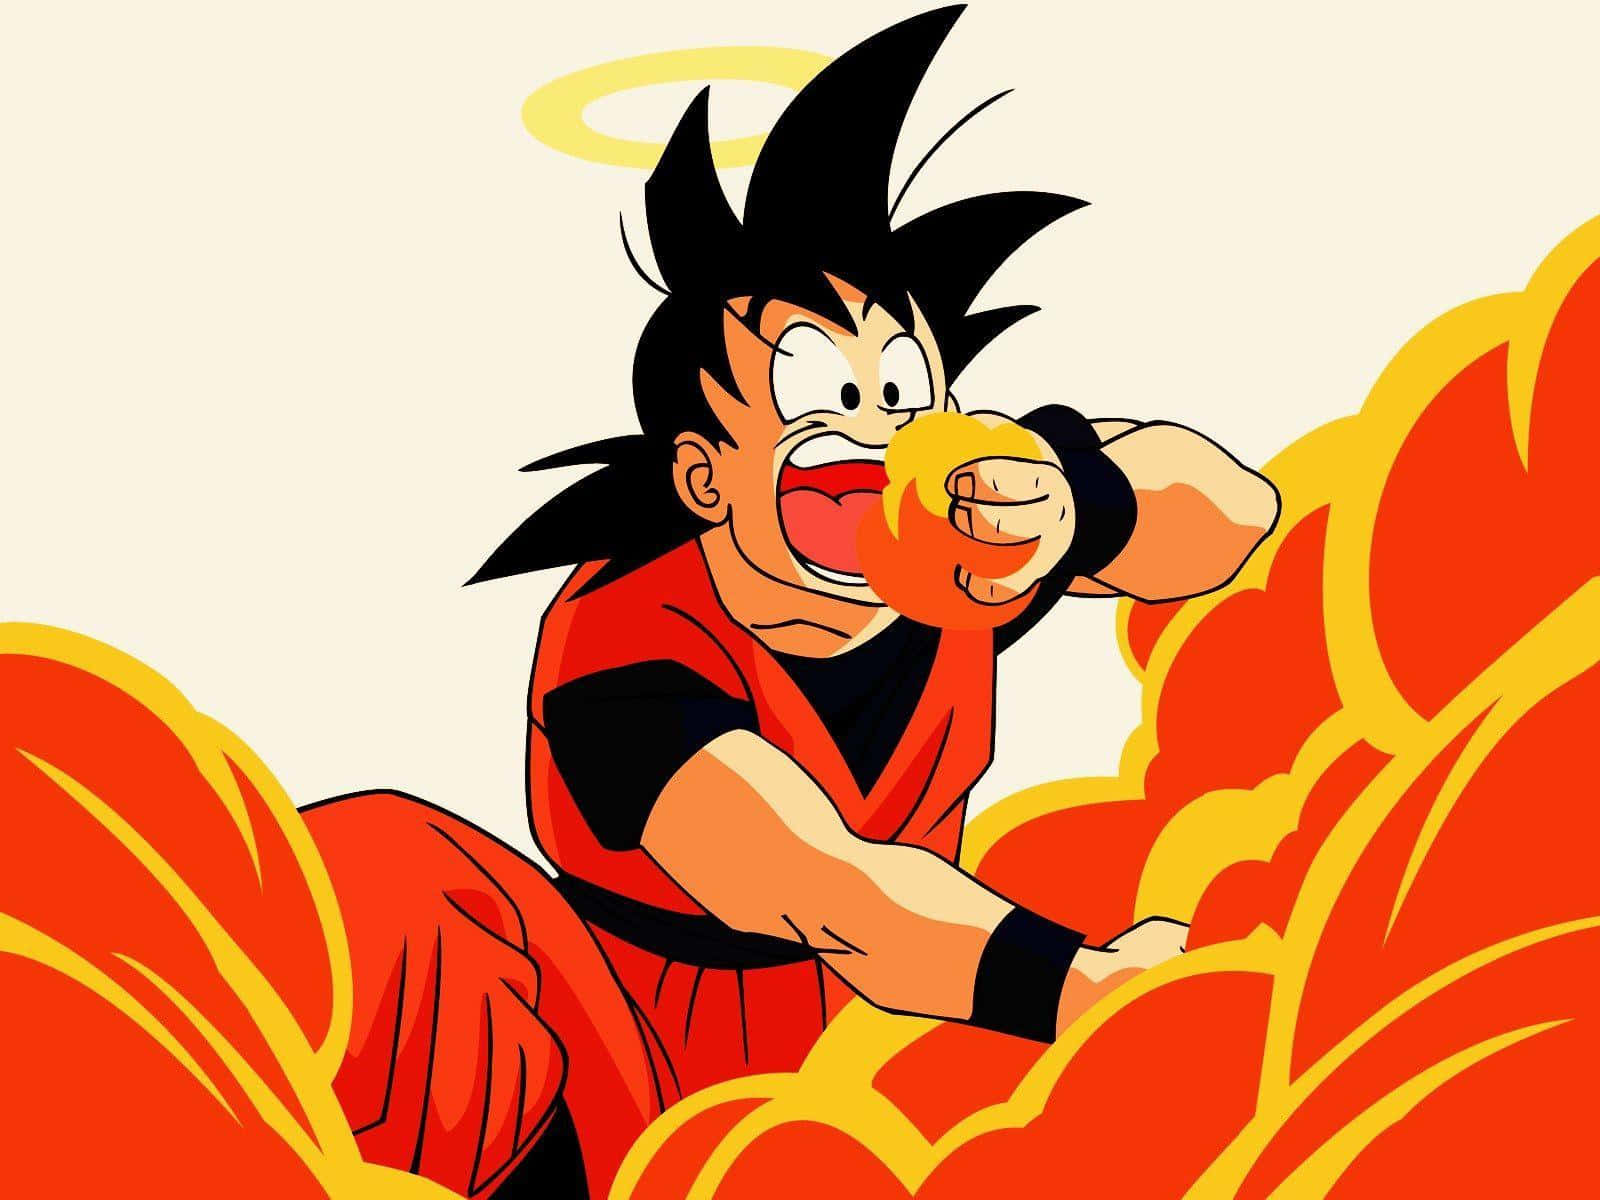 Goku uses his iconic Kamehameha to fire up the party! Wallpaper